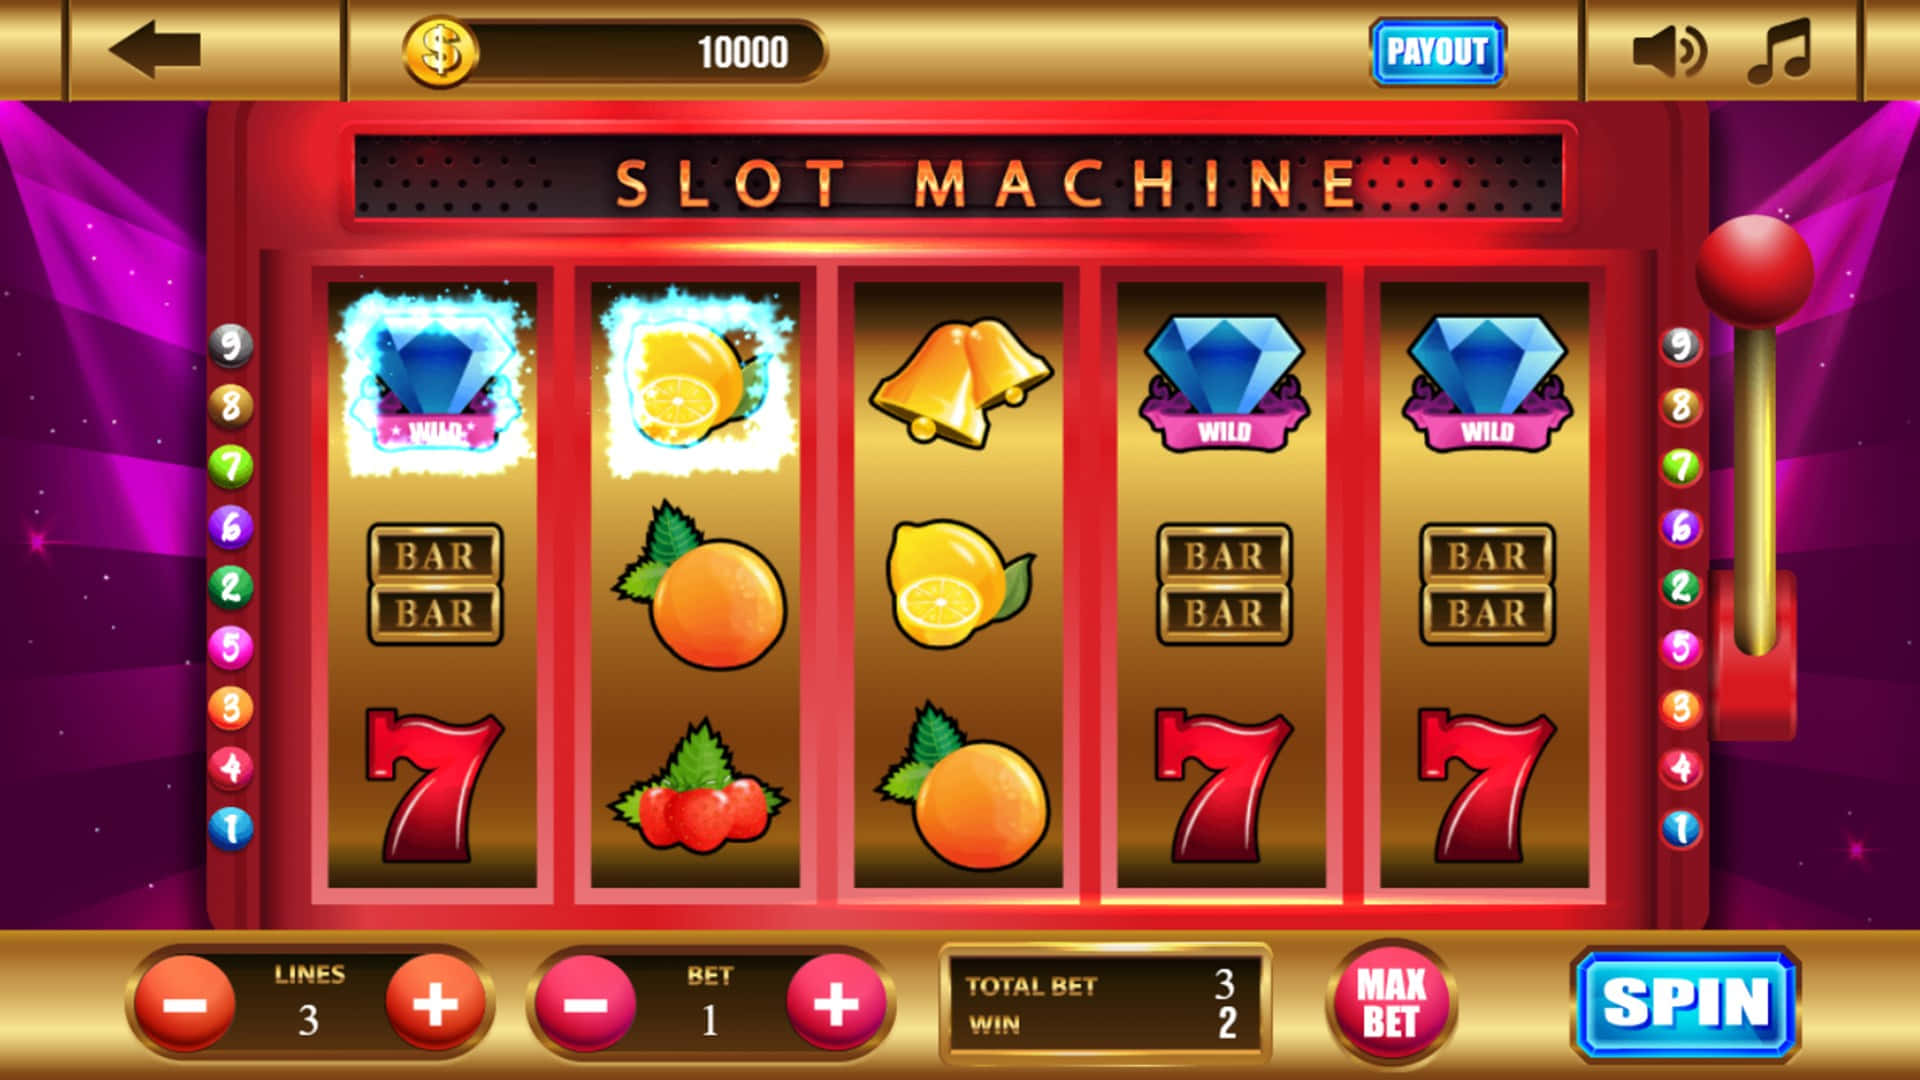 3 Easy Ways To Make casinos Faster